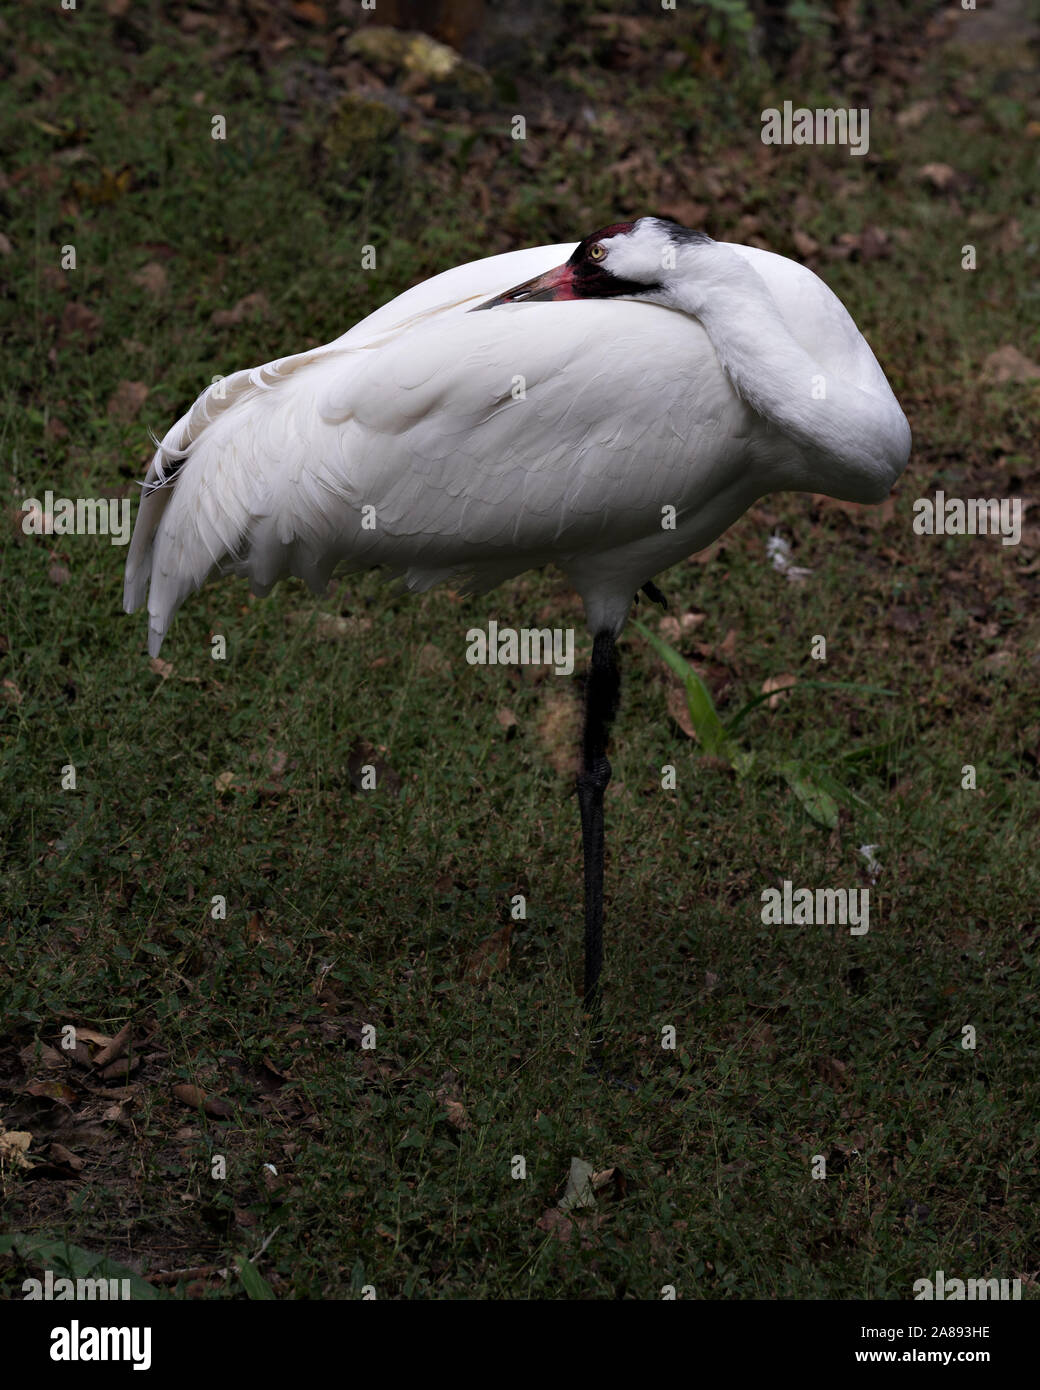 Whopping Crane bird standing tall with a nice foliage background enjoying its surrounding and environment while exposing its body, wings, head. Stock Photo